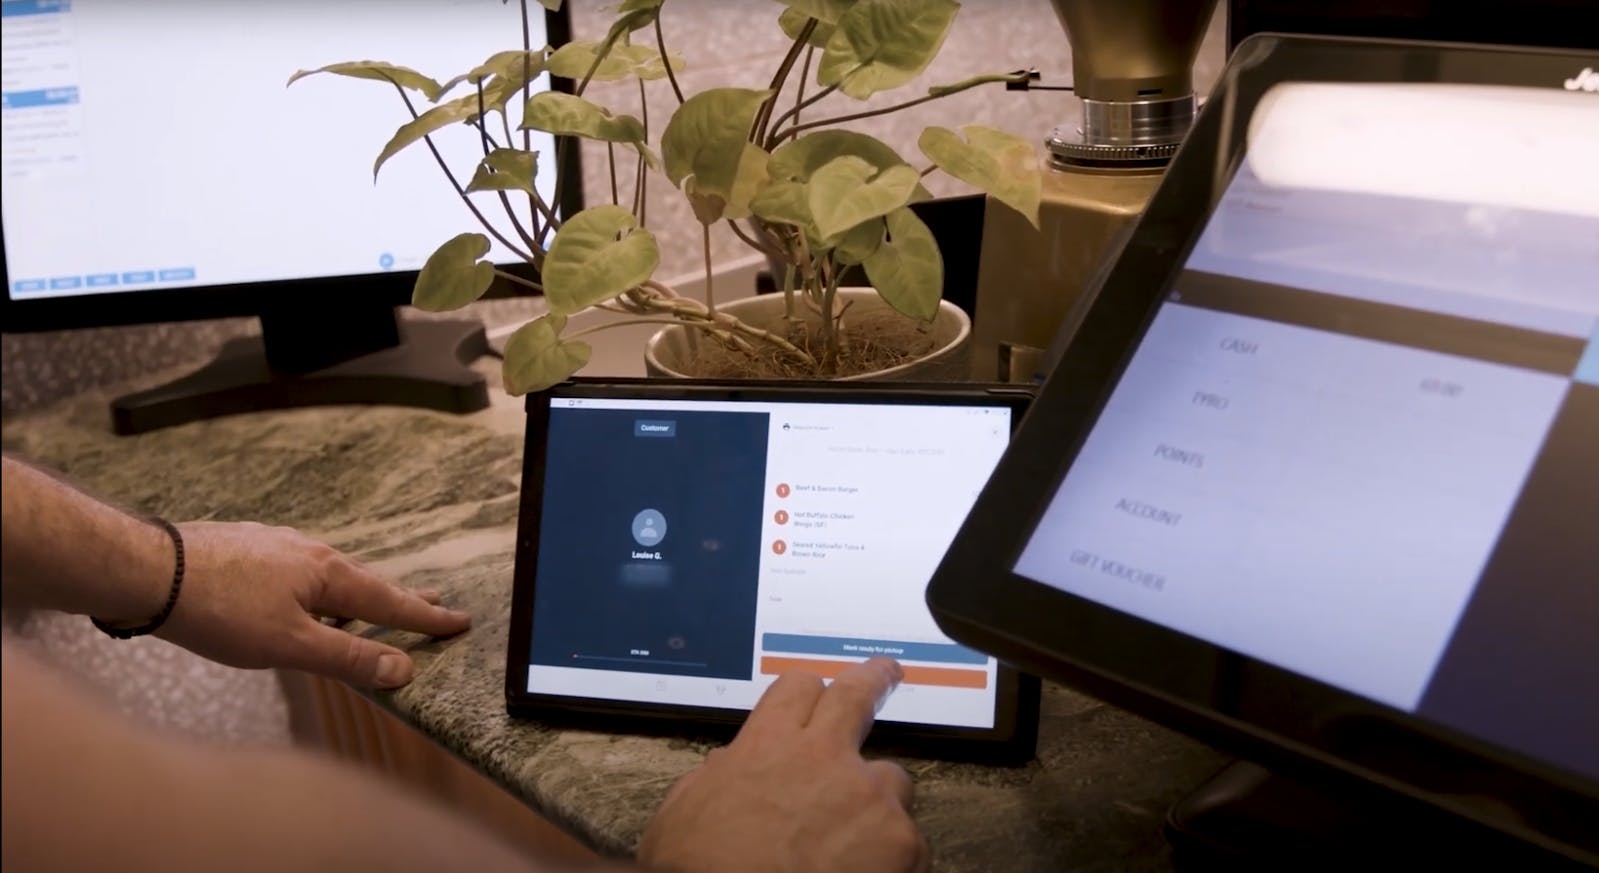 Image of restaurant staff using the Otter tablet to monitor orders